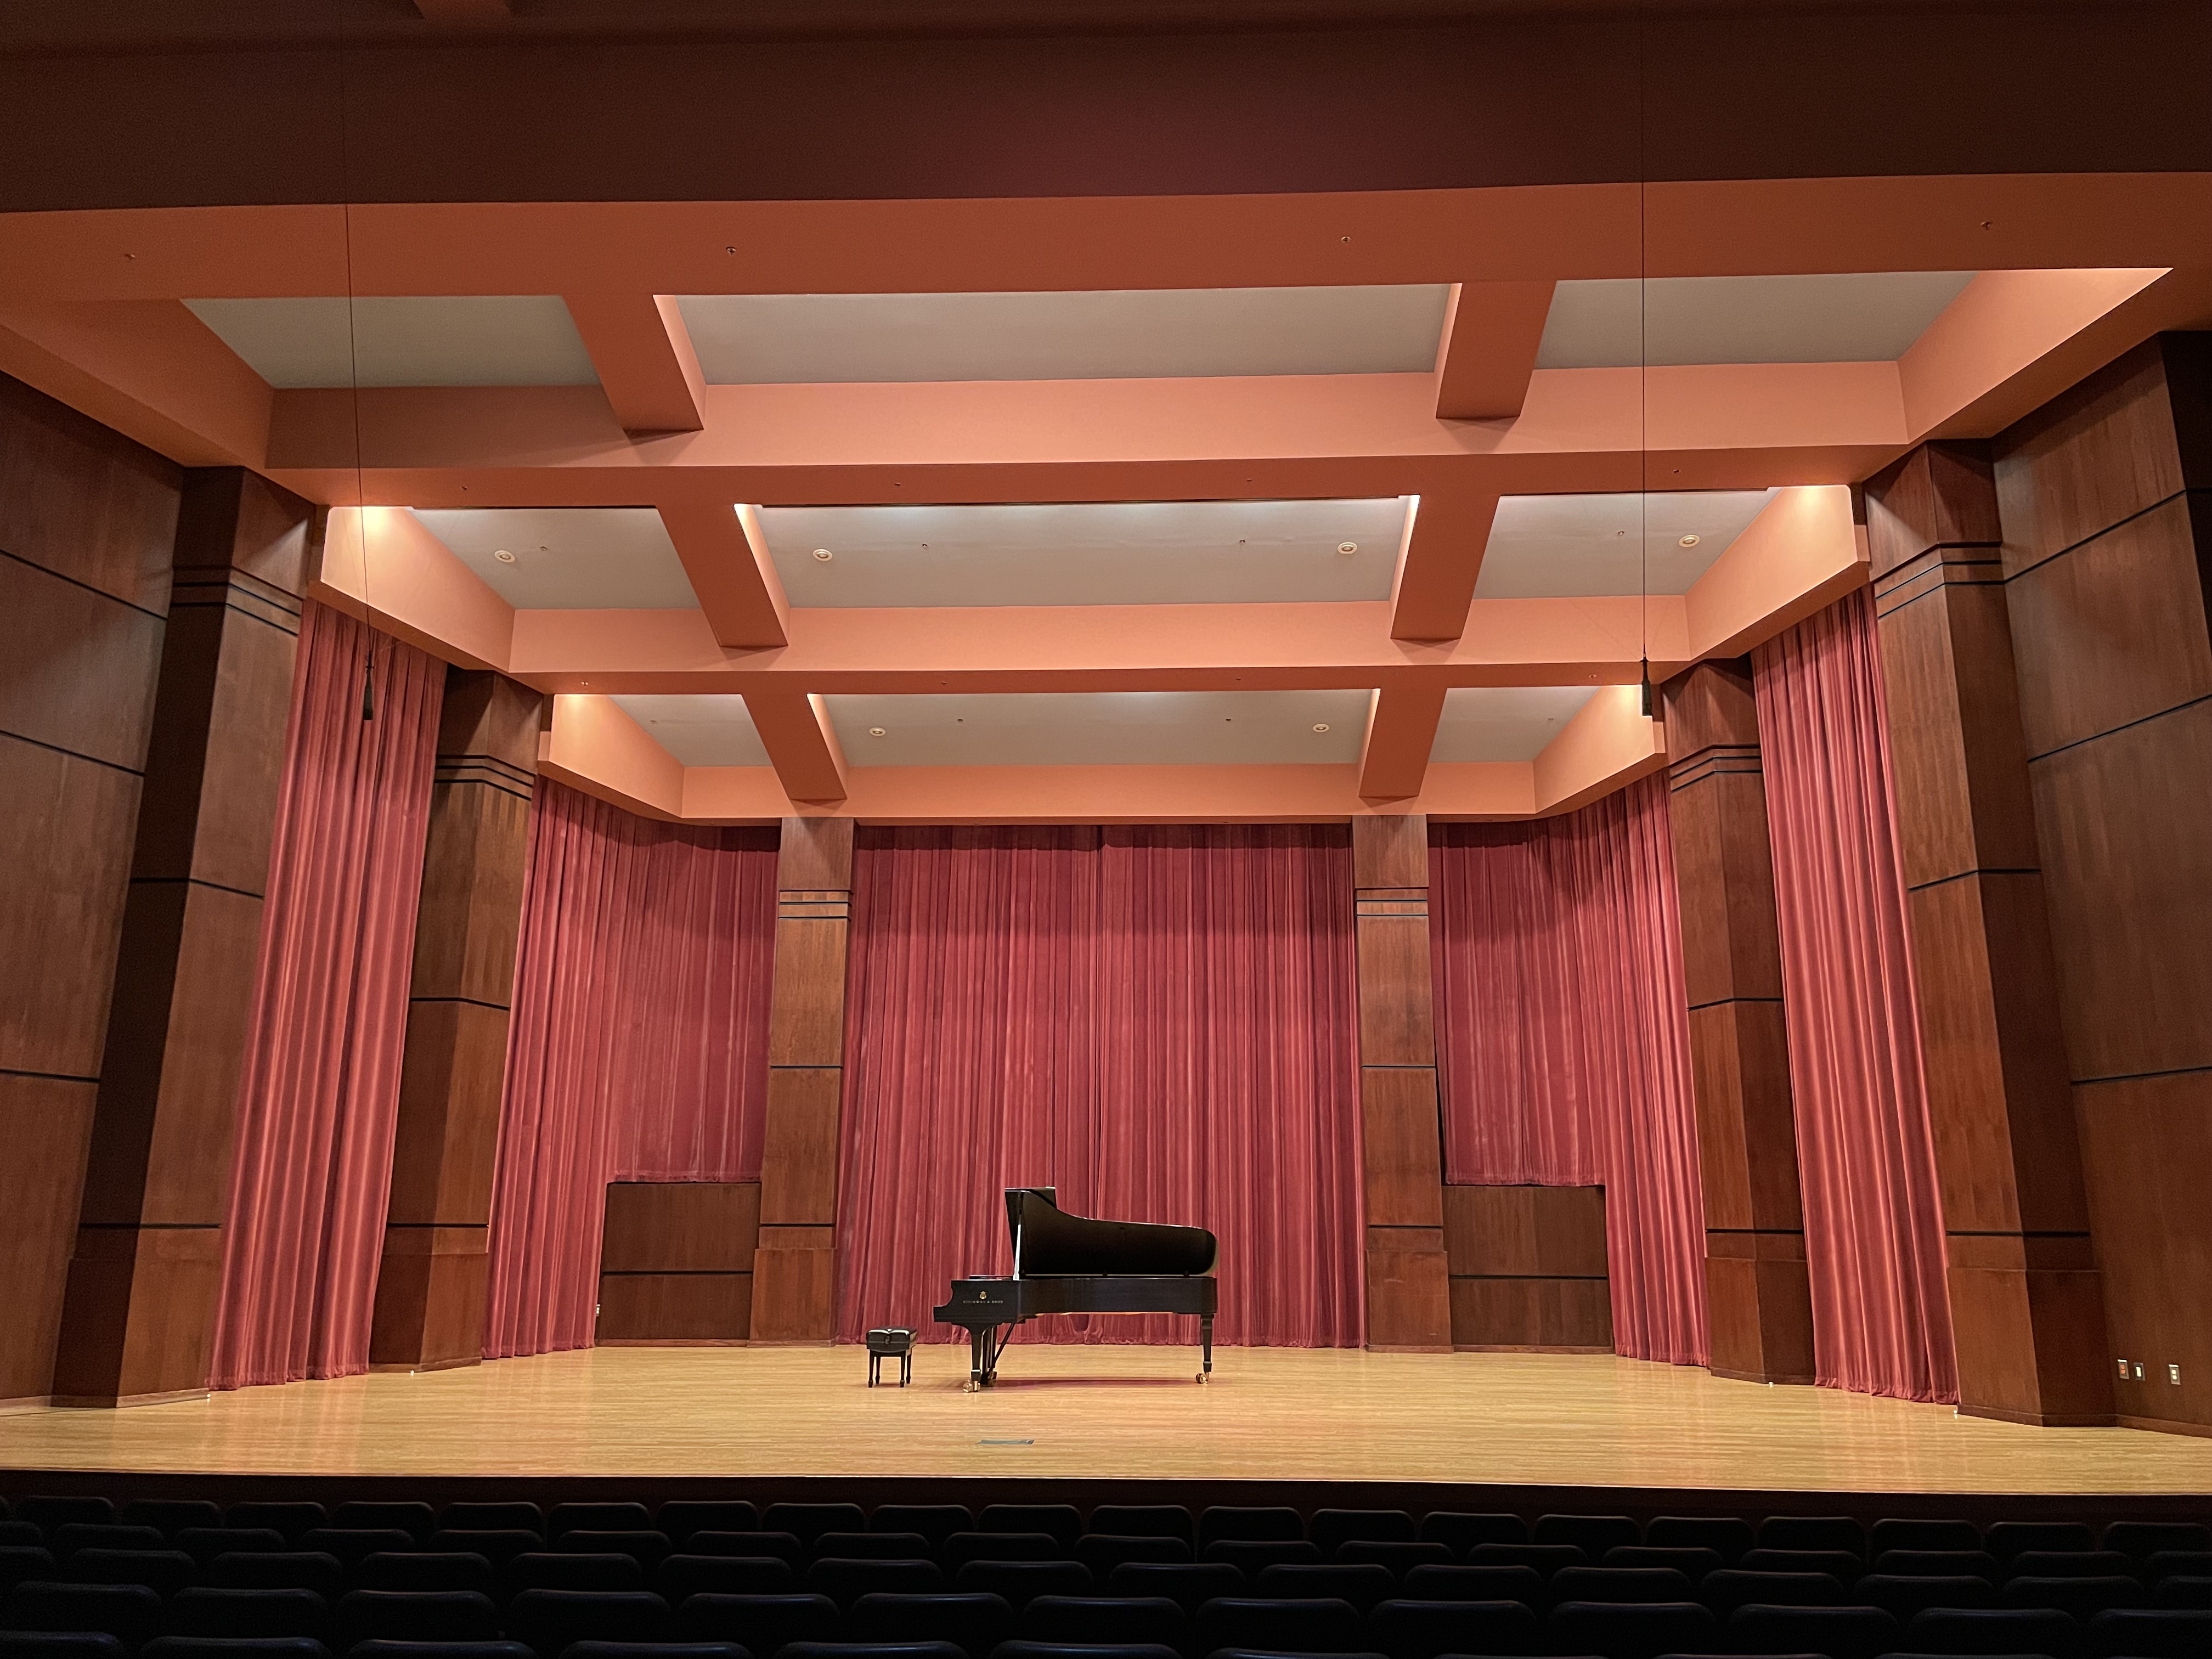 A view of the Riceland Hall stage from the audience.  There is an open grand piano on stage.  The celing is peach and white.  There are red curtains drawn broken up by wood grain columns.